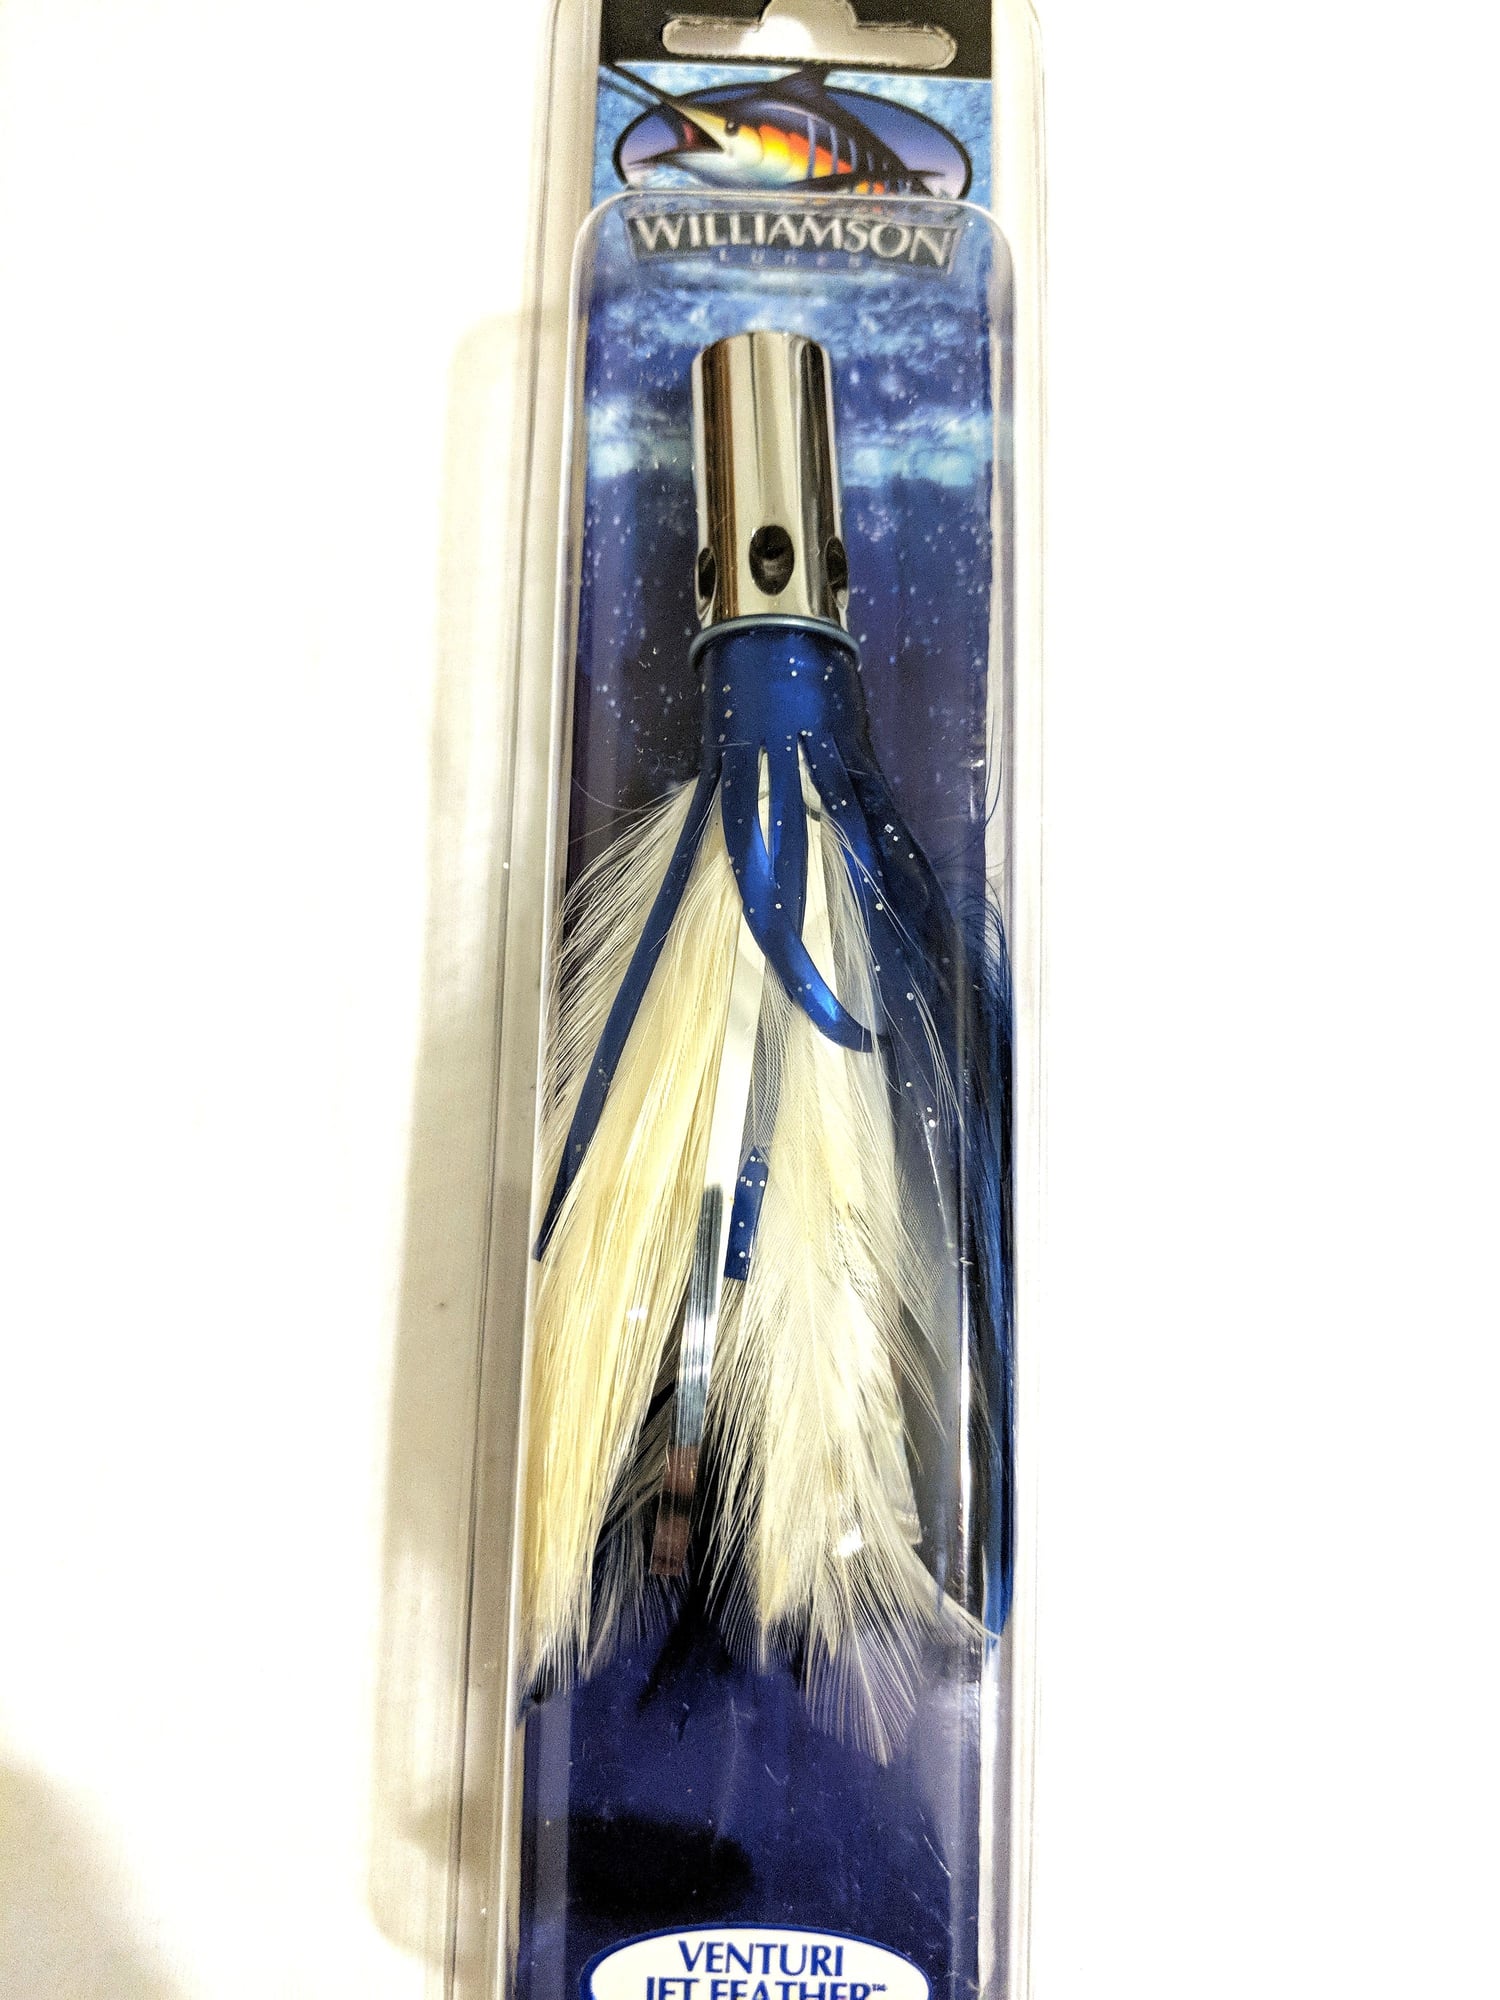 K & G . Williamson Venturi Jet Feather trolling lures  4 colors   Half Price - The Hull Truth - Boating and Fishing Forum